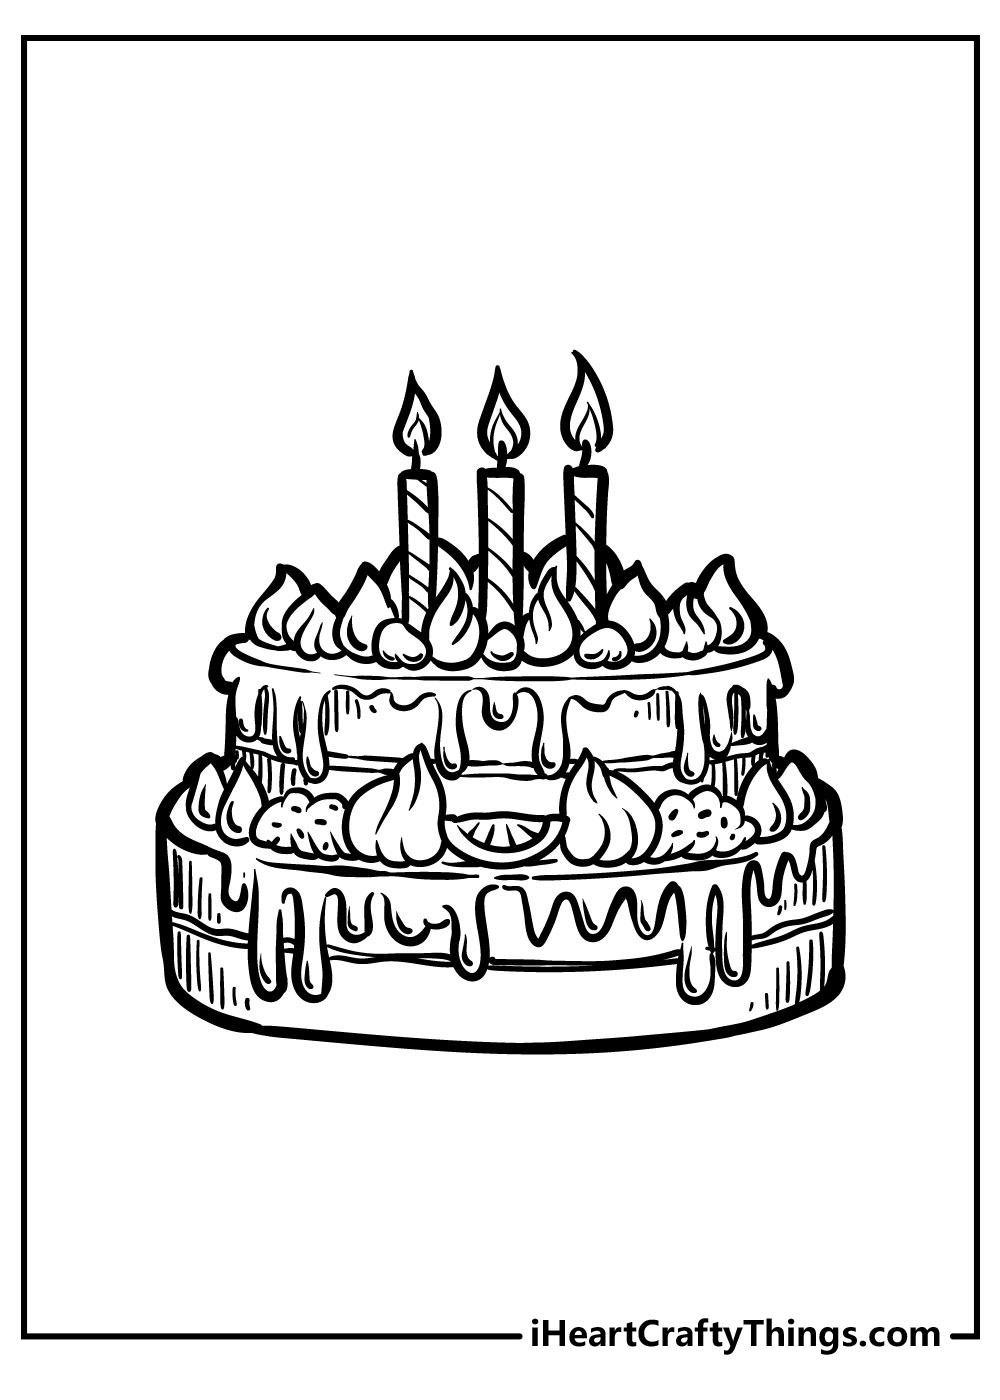 ice cream cake coloring pages